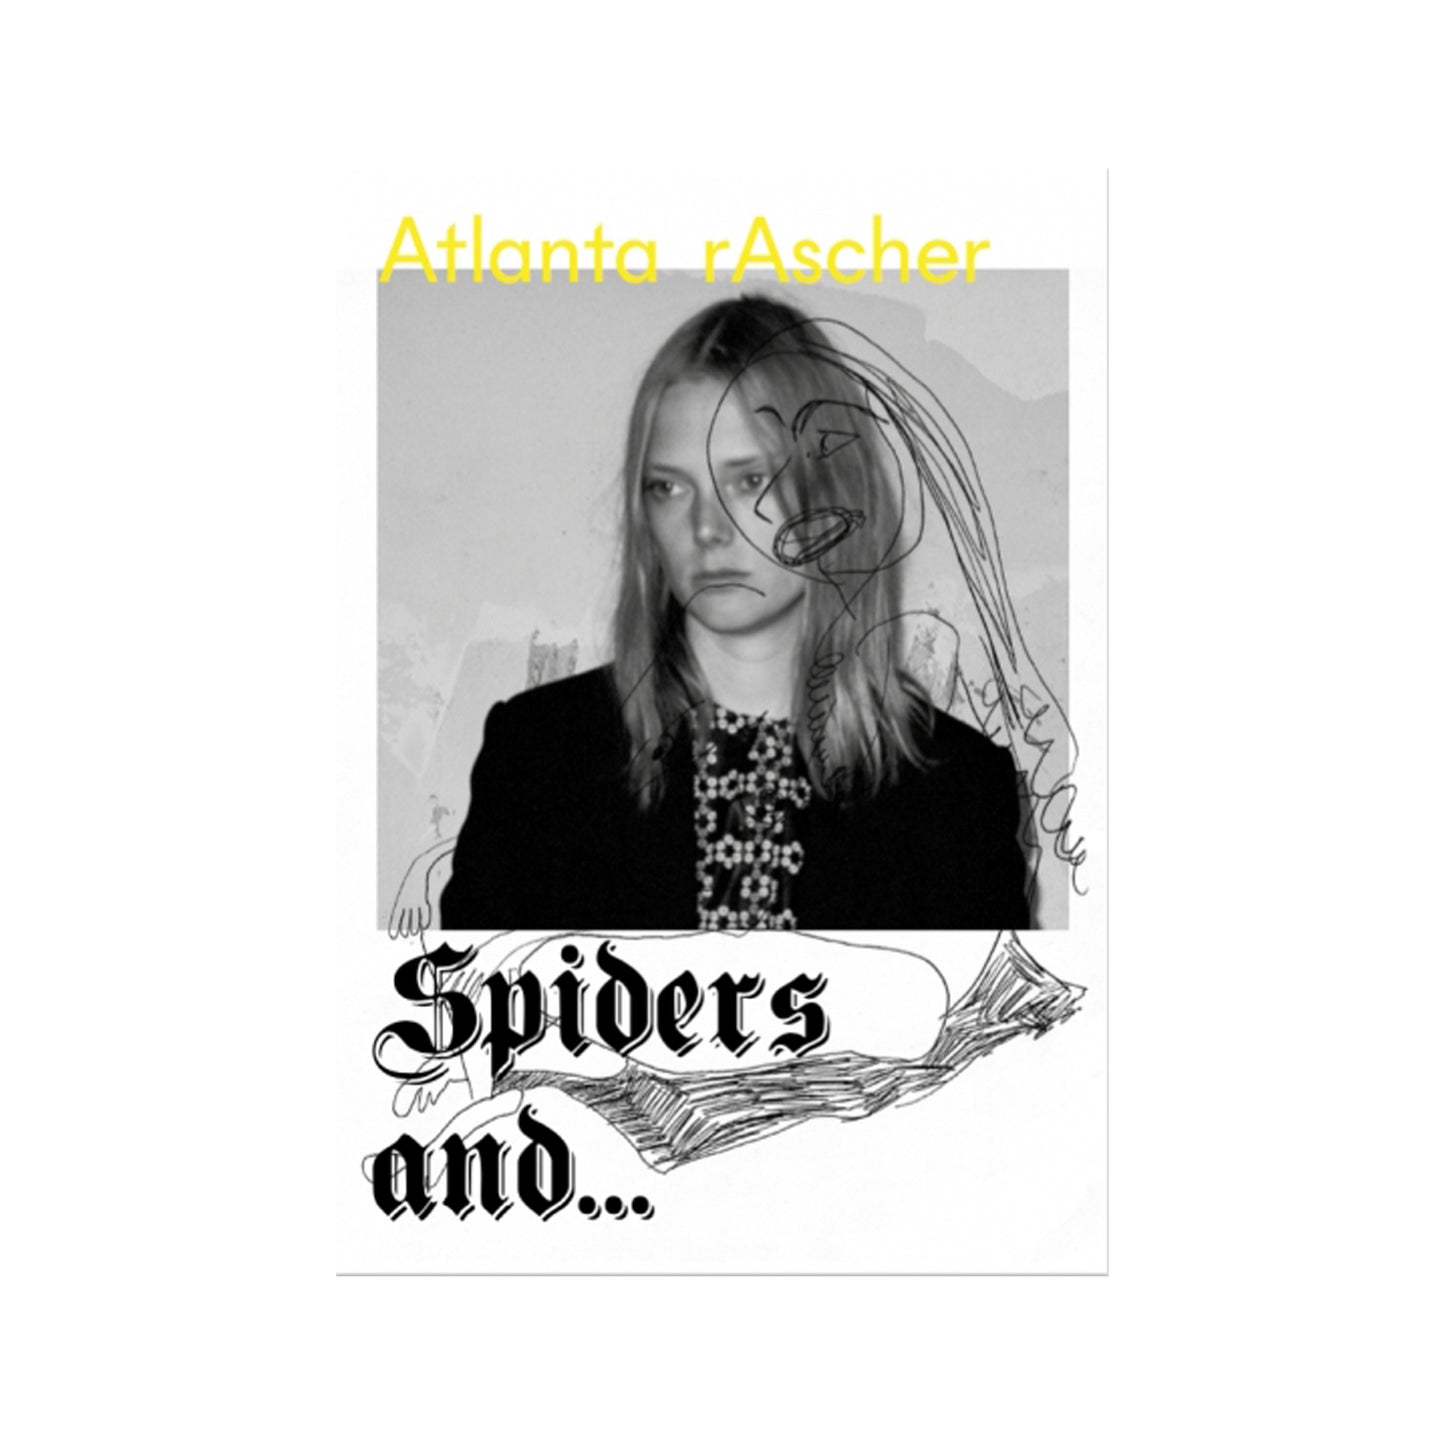 Spiders and... girls by Atlanta Rascher